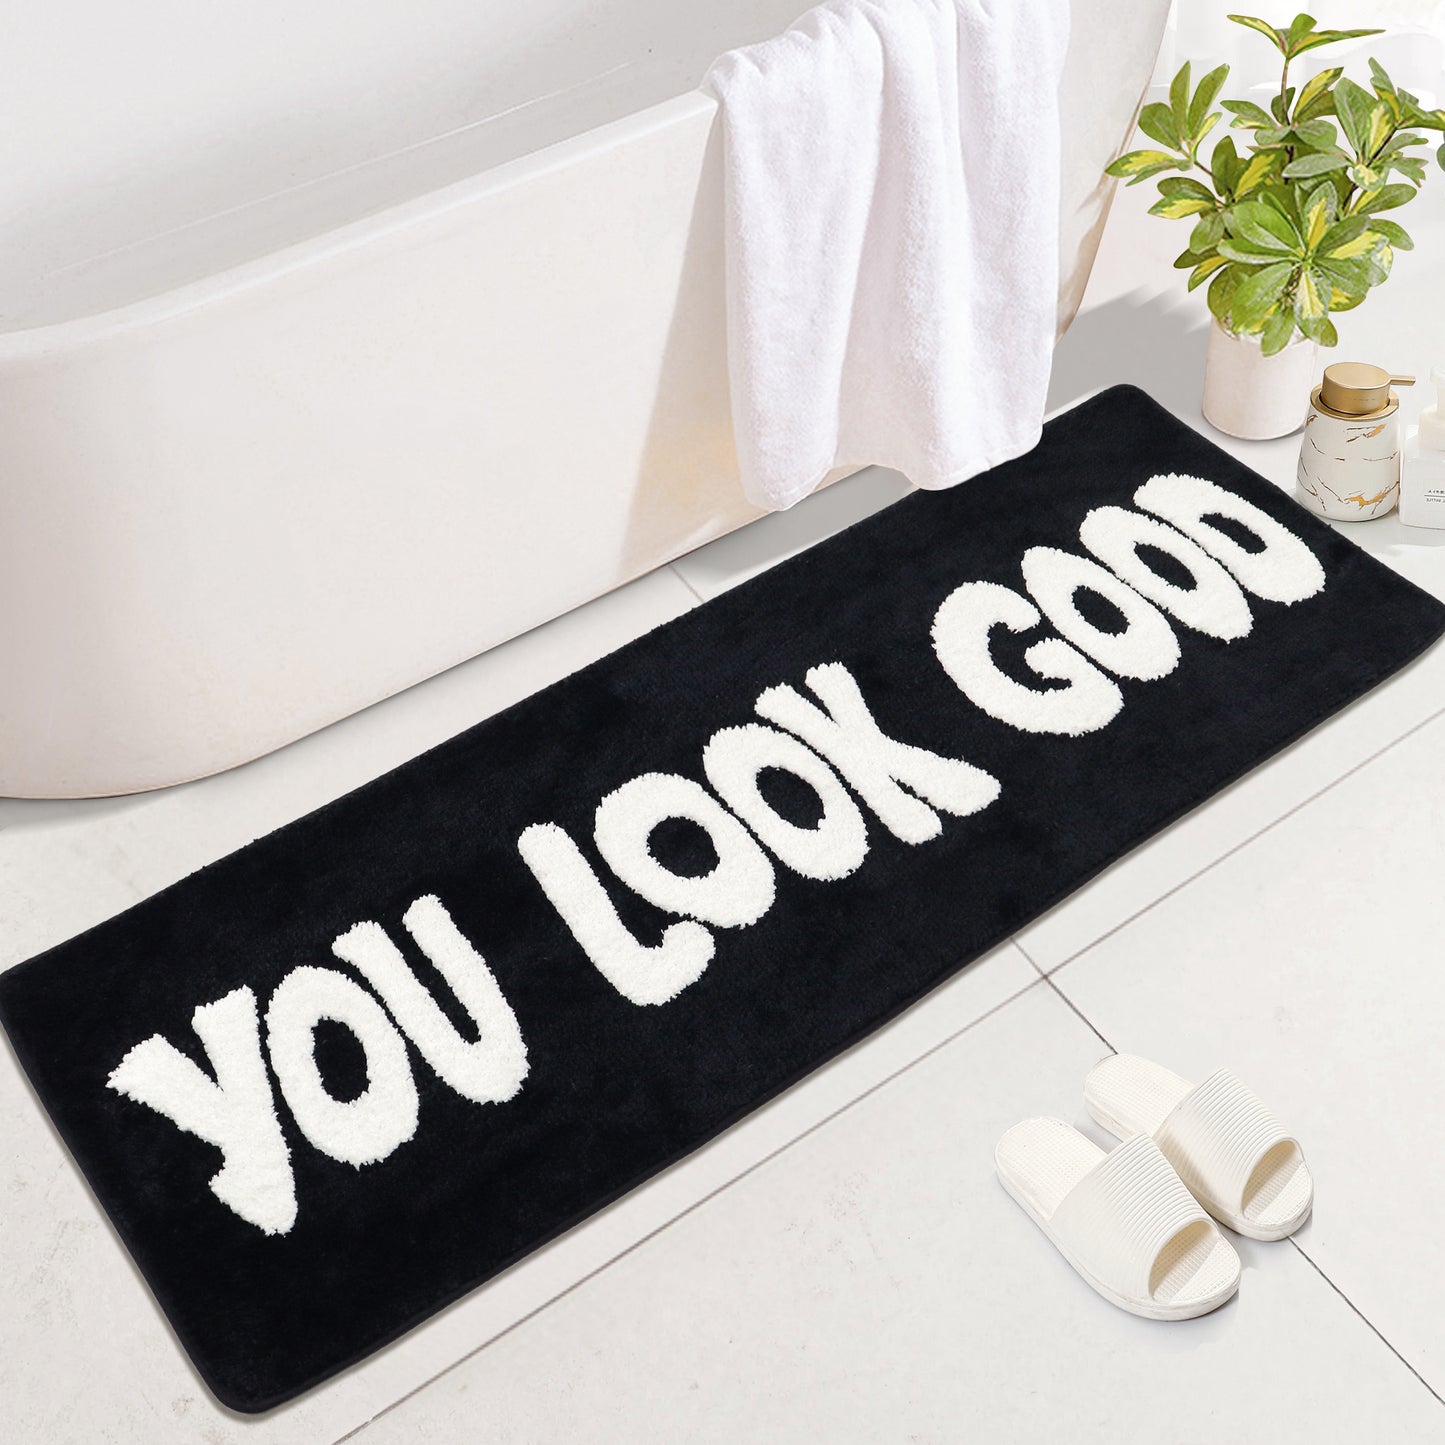 20"x60" "You Look Good" Runner Rug - Non-Slip Long Bath Mat - Soft and Absorbent Chic Bathroom Decor for Bathtub, , Laundry Room,Bedroom, and Shower